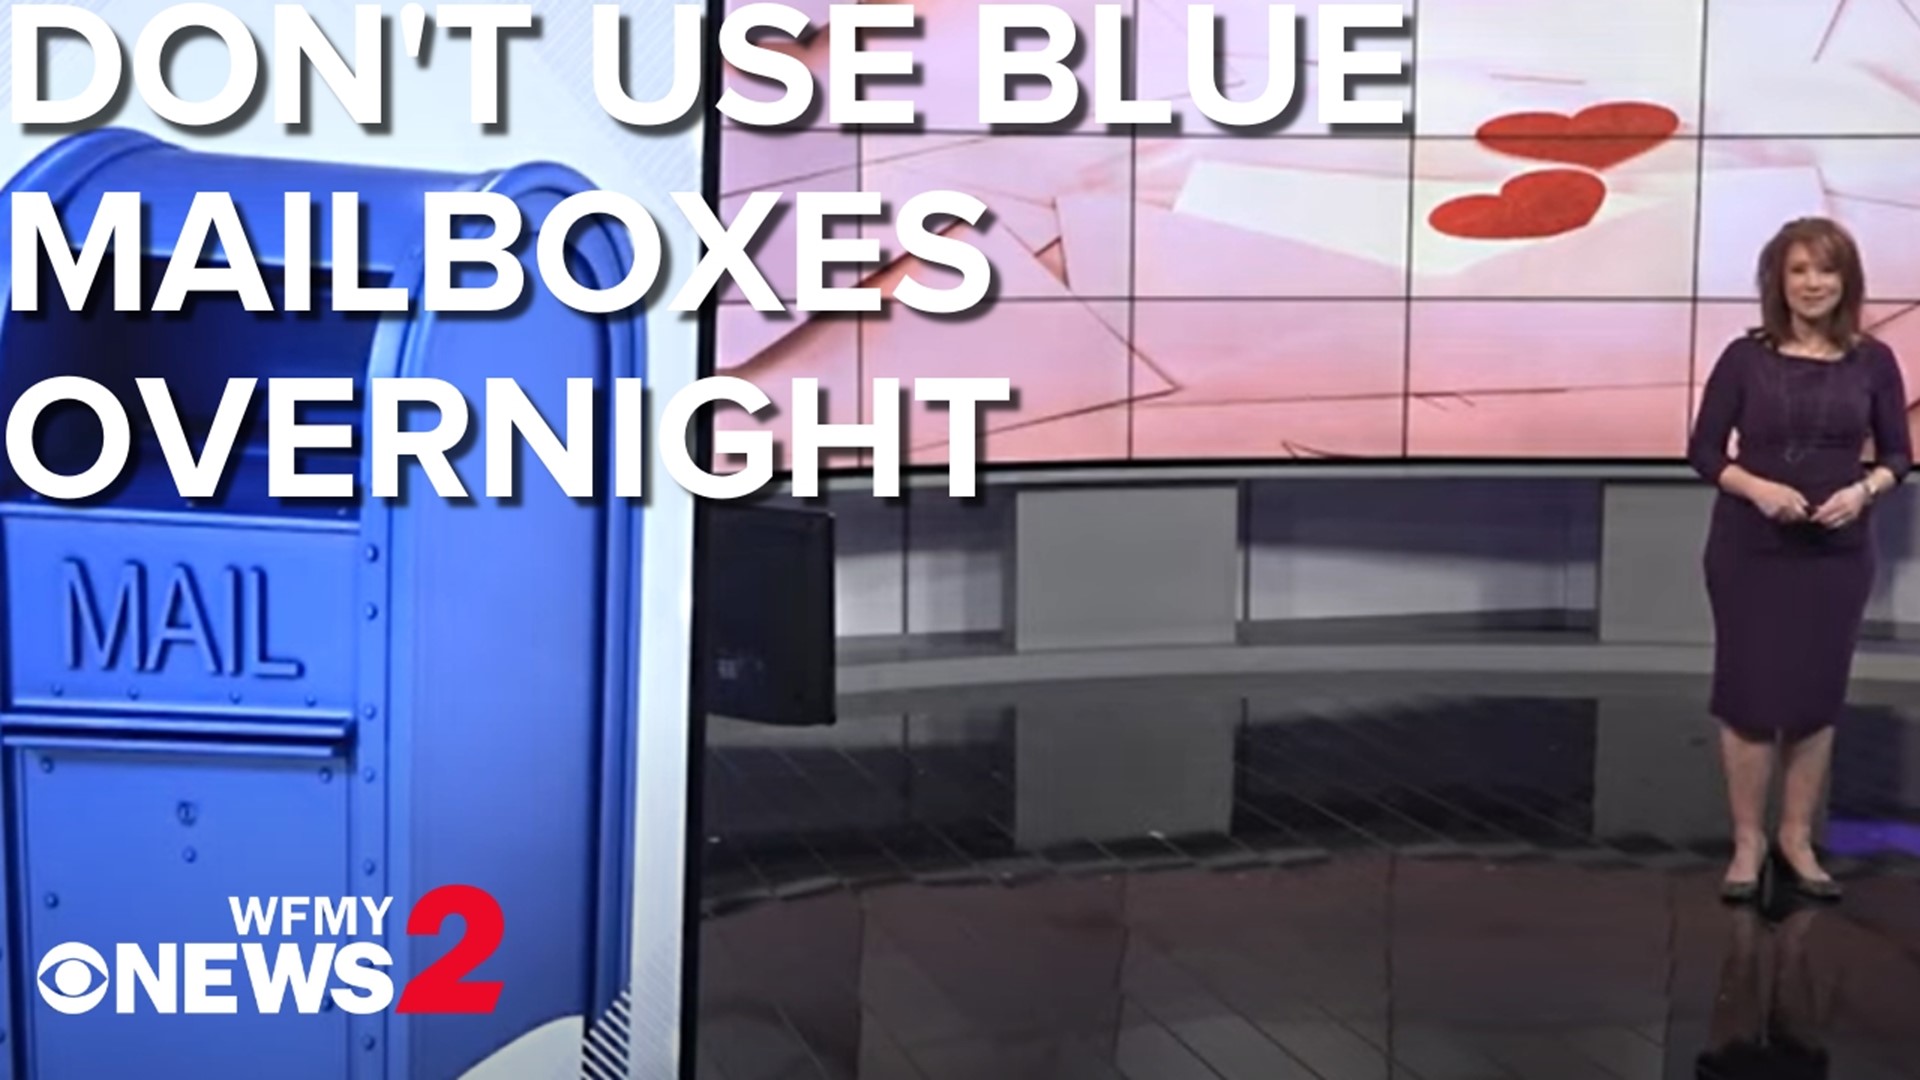 Thieves target the USPS blue mailboxes outside. Here’s how they do it without being detected.